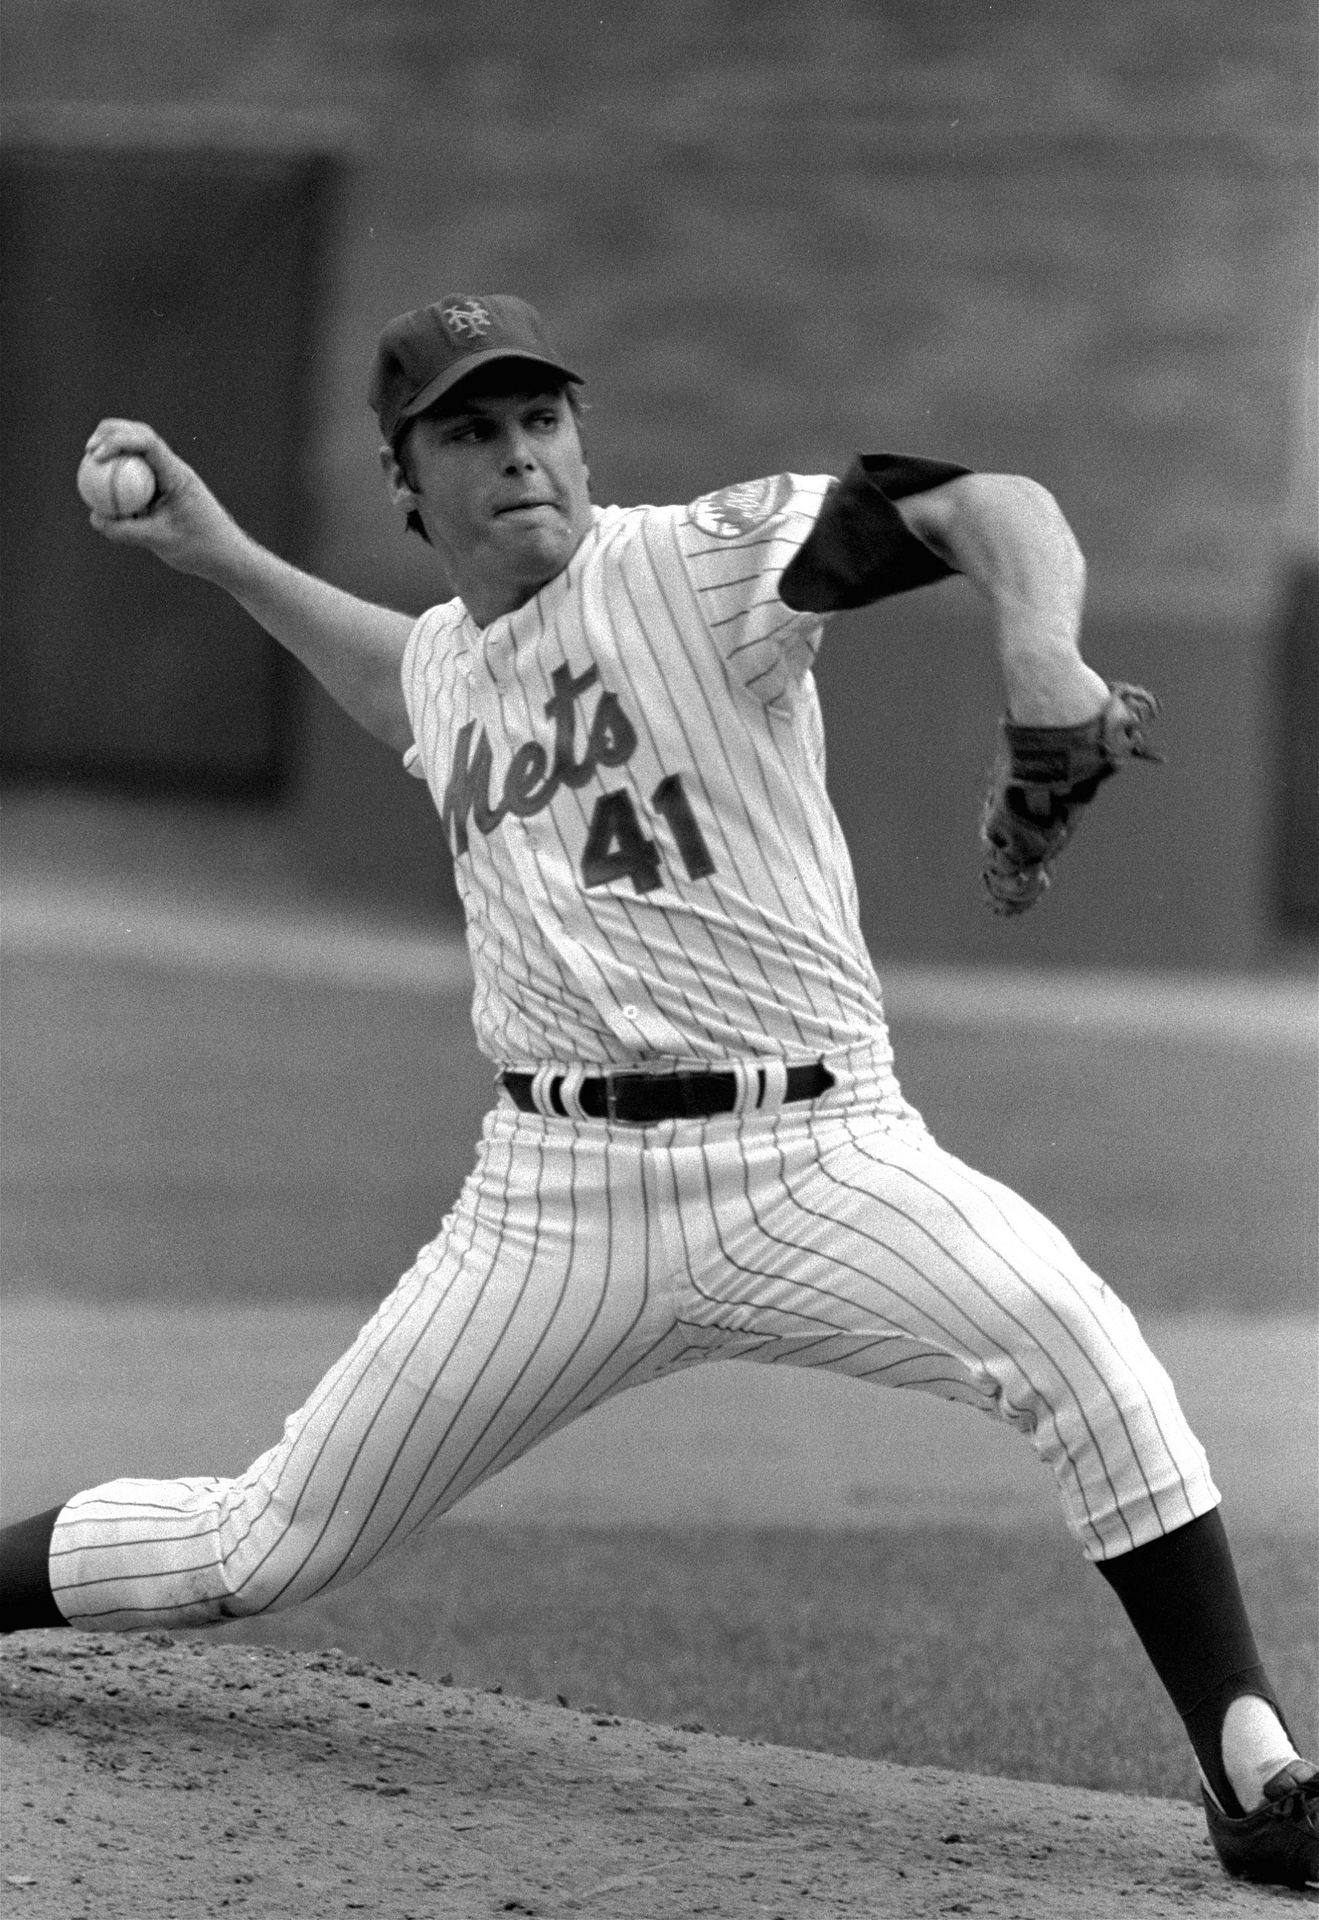 Tom Seaver, Hall of Fame pitcher who led 'Miracle Mets' to victory